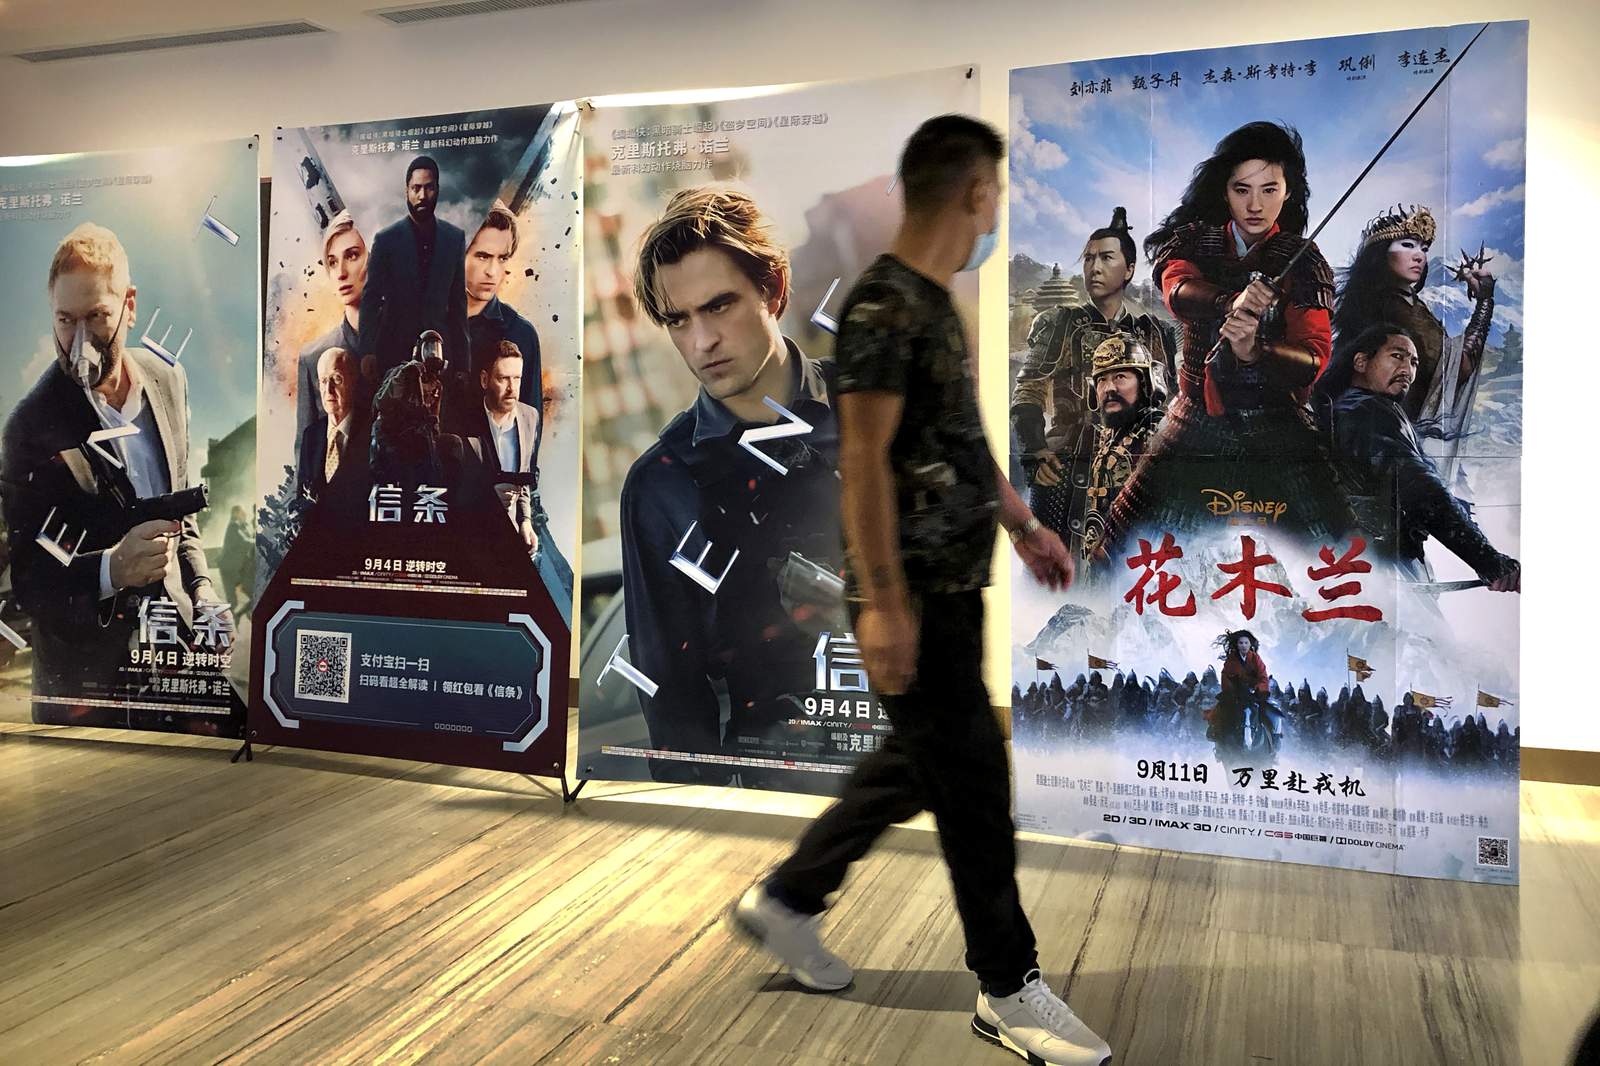 Chinese viewers find Disney’s new ‘Mulan’ to be tired take